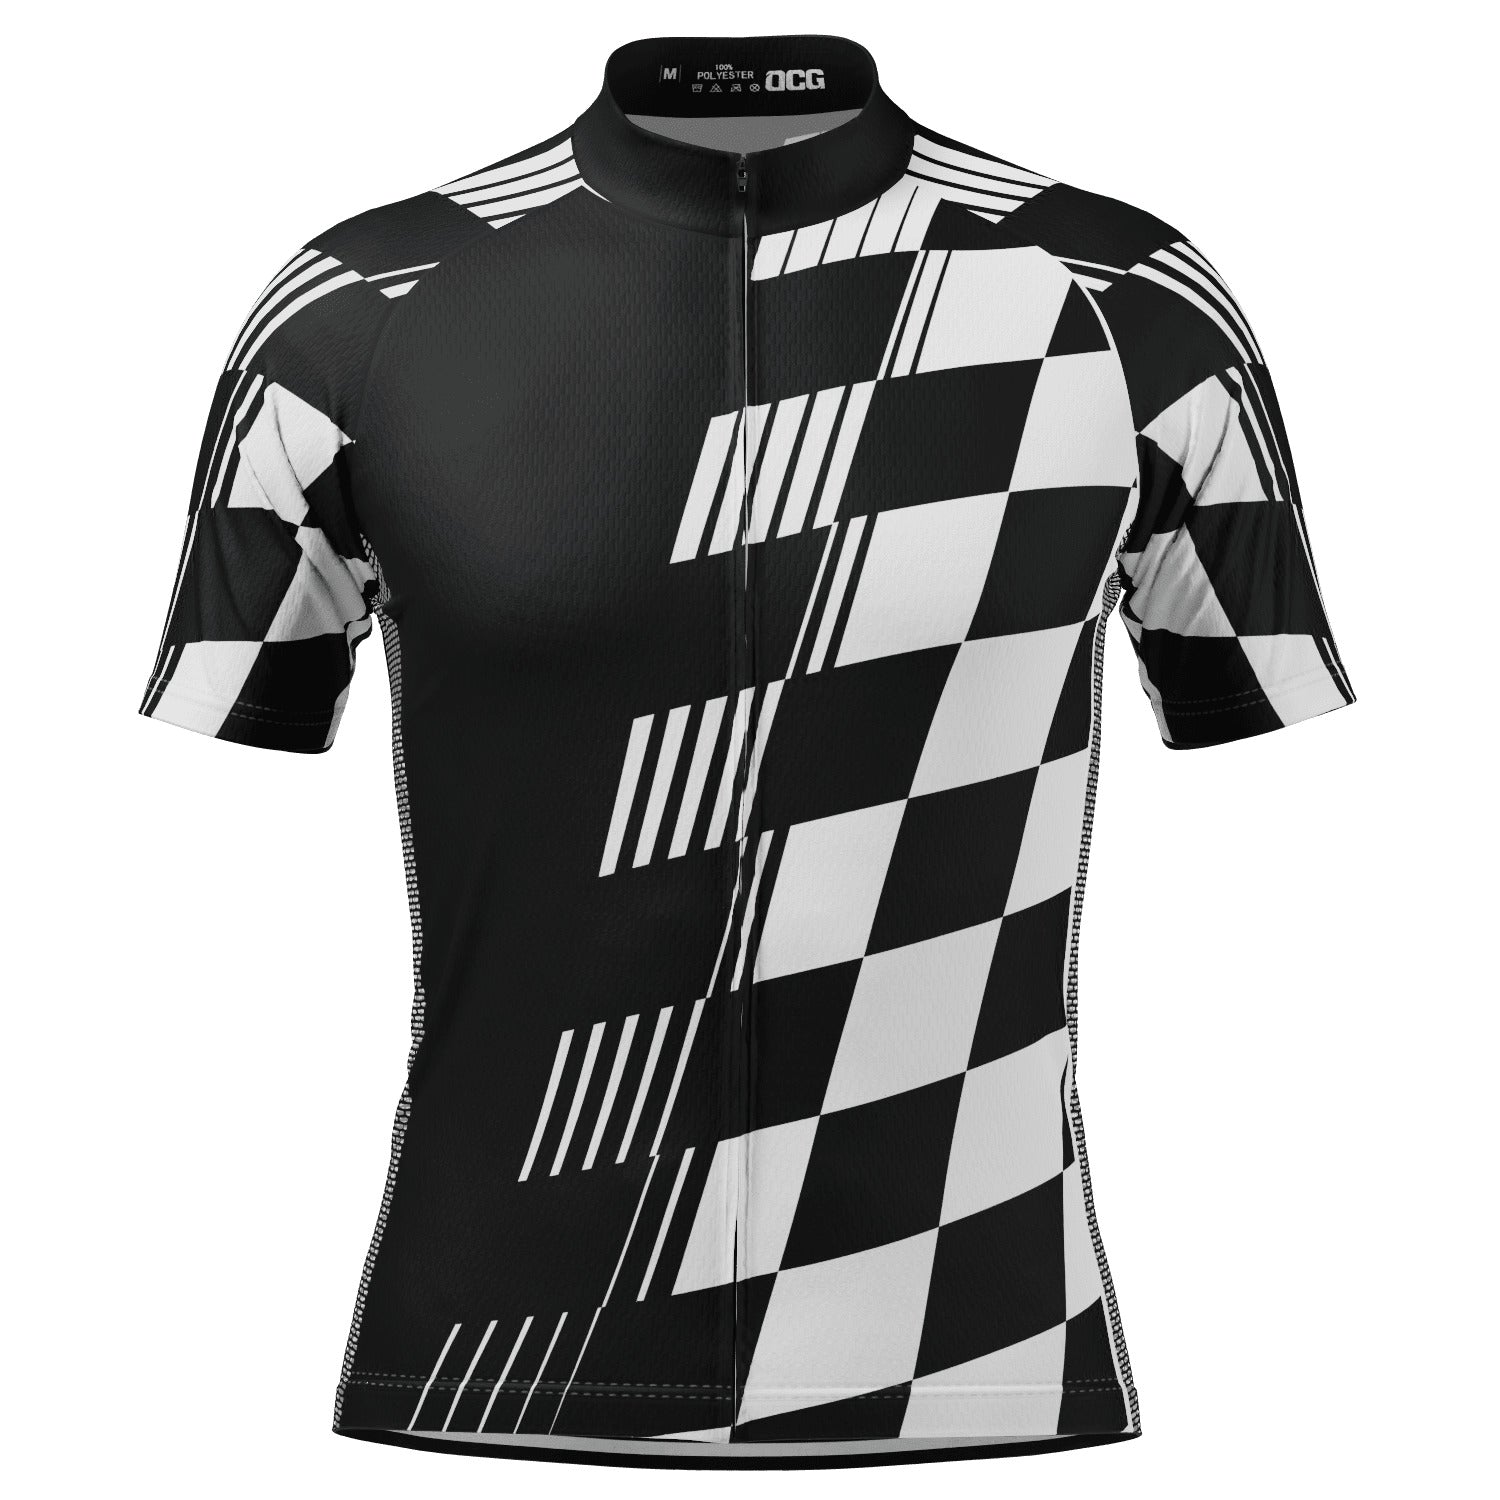 Men's Athletic Modern Auto Checkered Short Sleeve Cycling Jersey